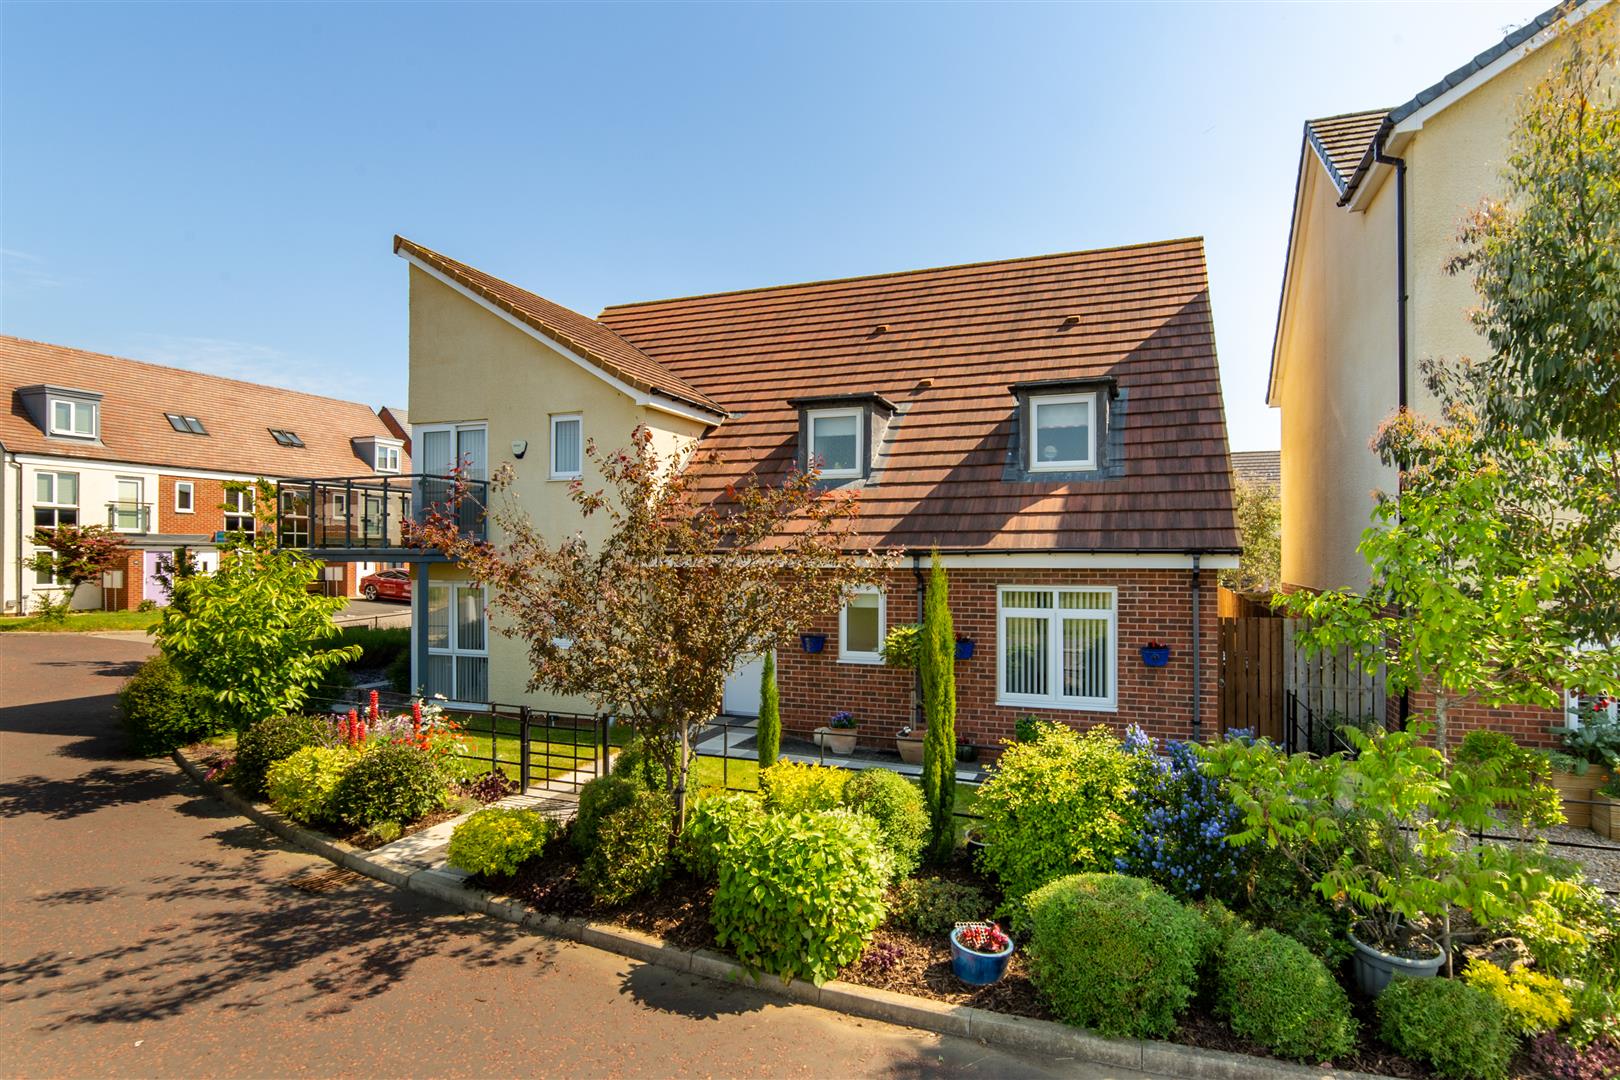 4 bed detached house for sale in Lambley Way, Great Park, NE13